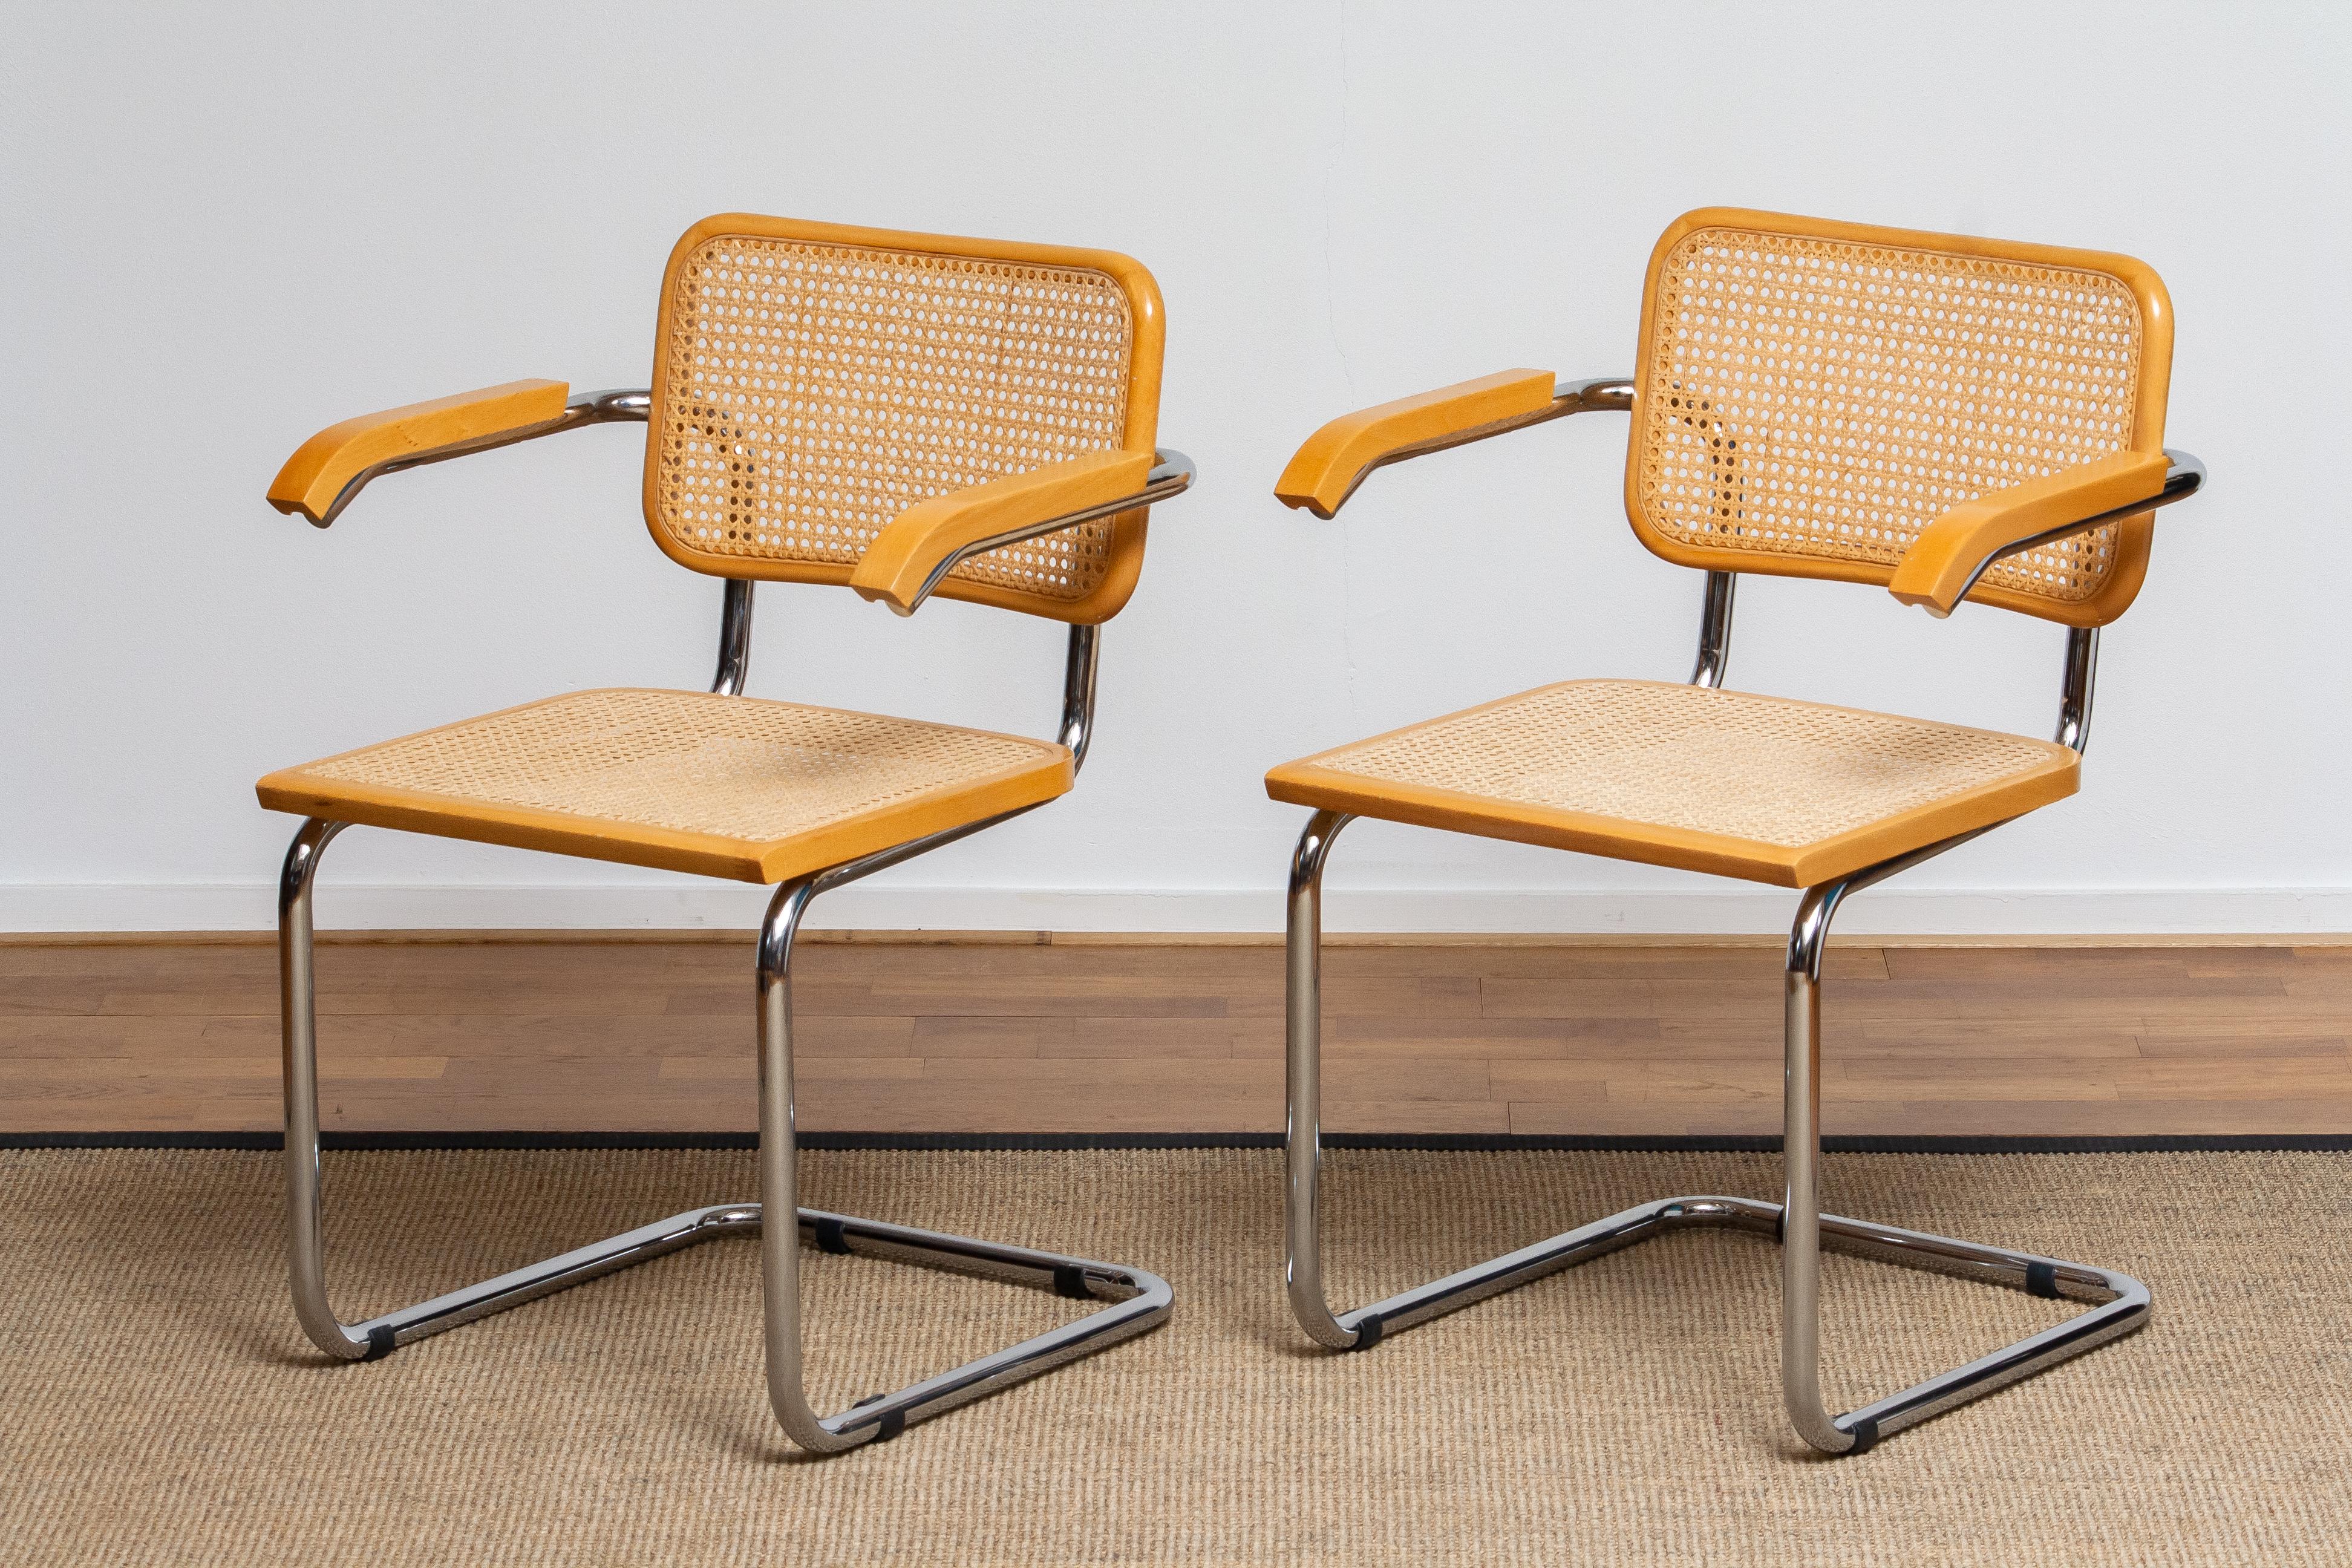 Italian Pair of Marcel Breuer Cane or Chrome and Gold Beech Cesca S64 Chairs, Italy